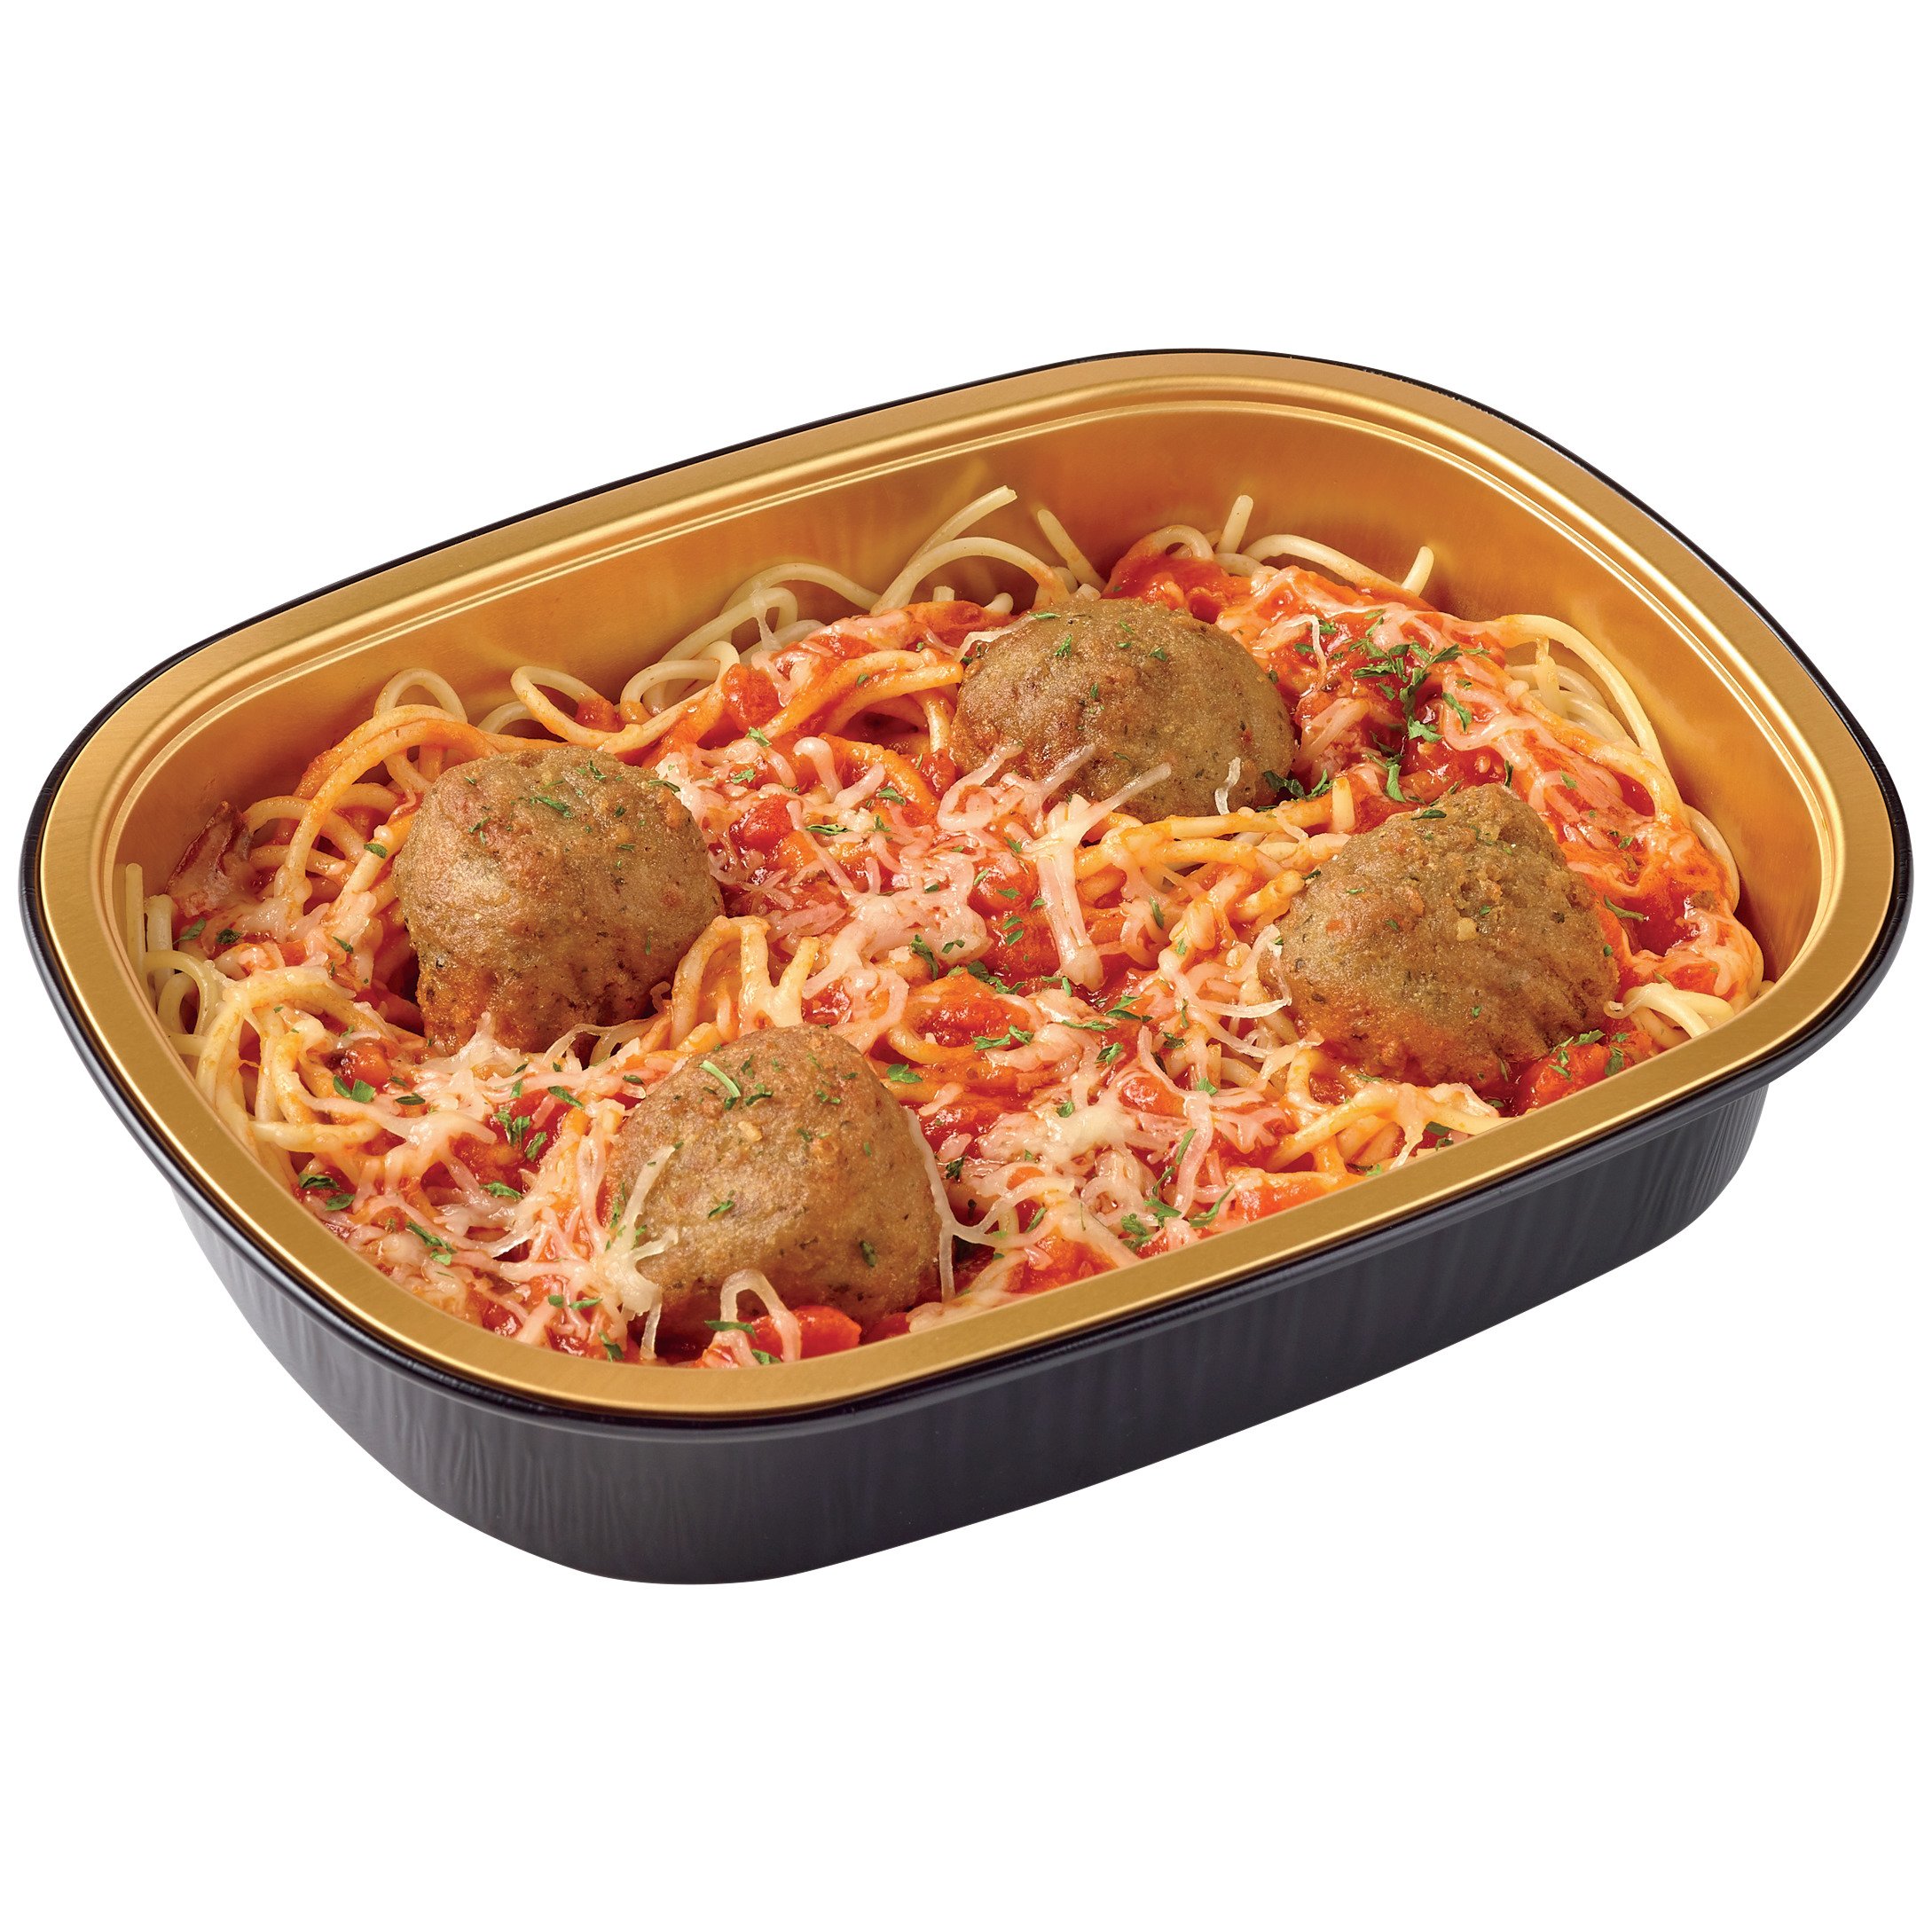 Campbell's SpaghettiOs with Meatballs - Shop Pantry Meals at H-E-B